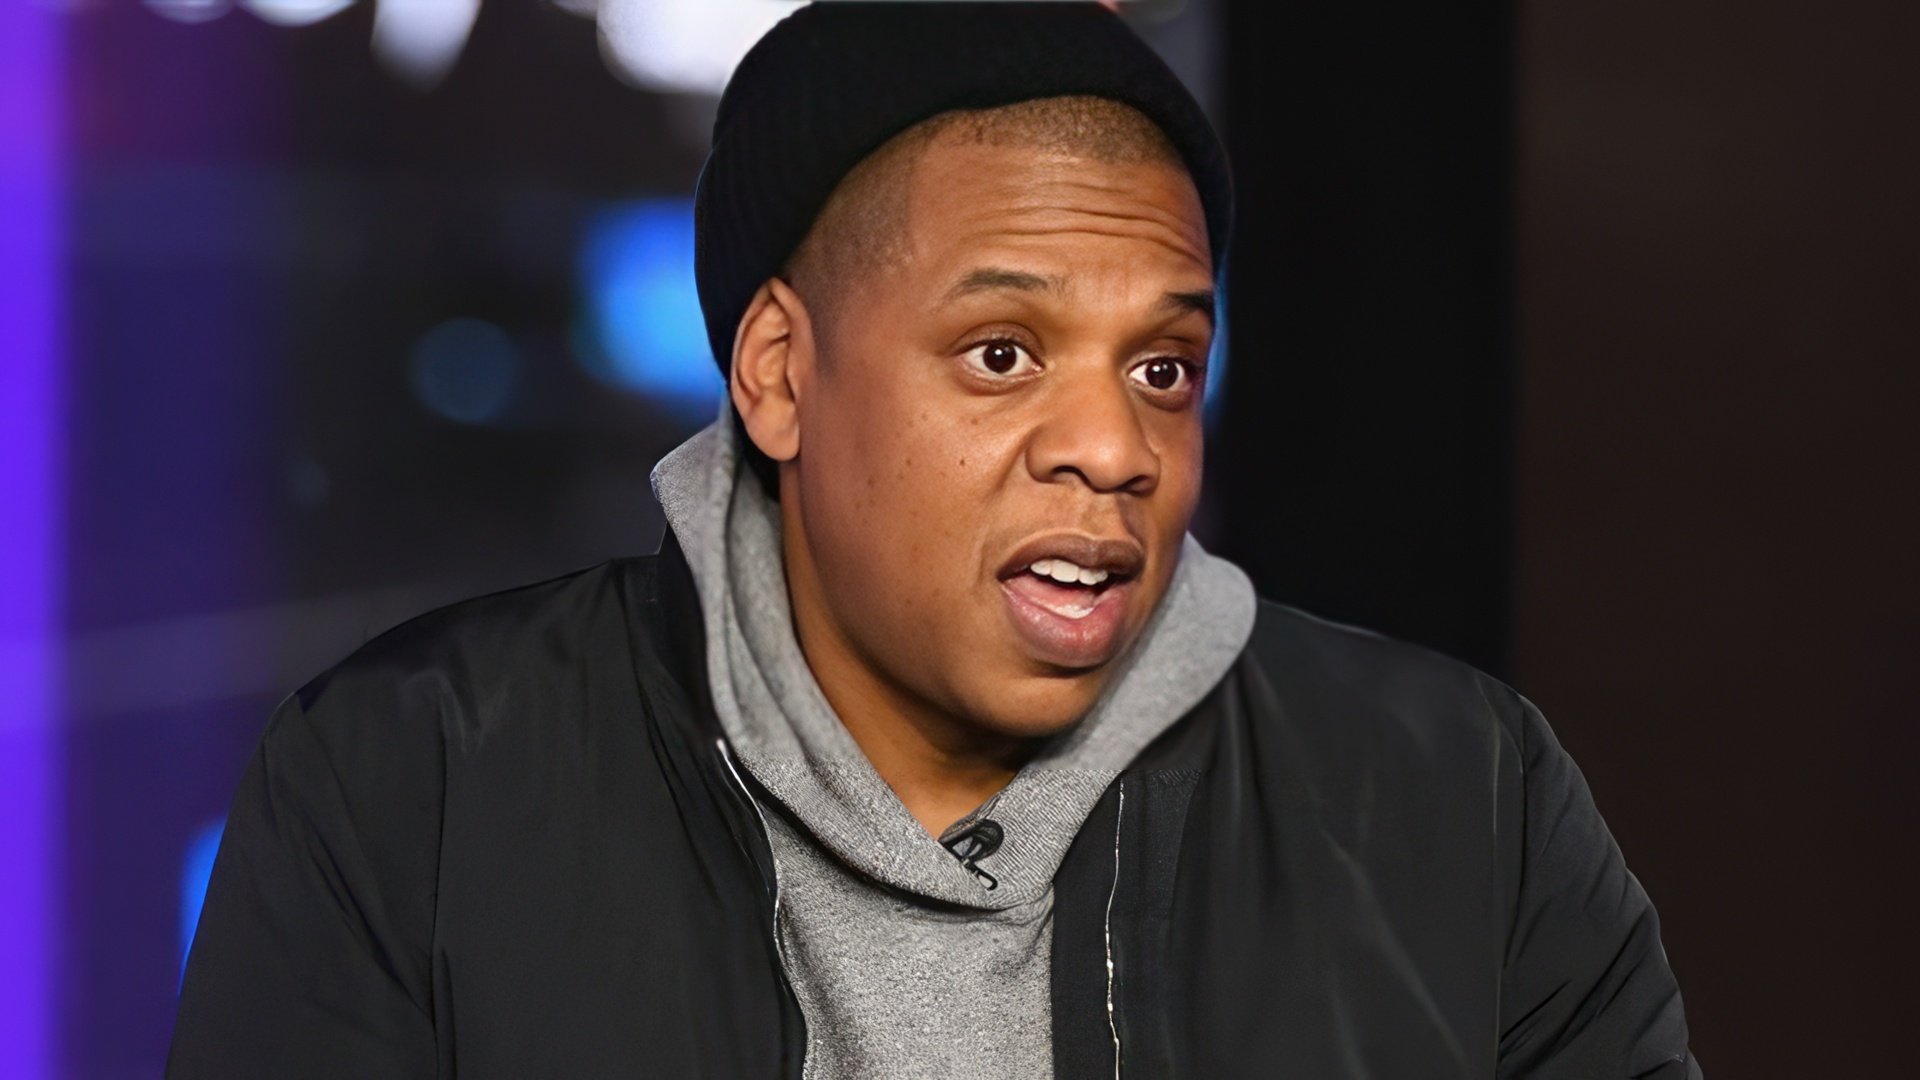 Jay-Z pursued his goal against all the odds